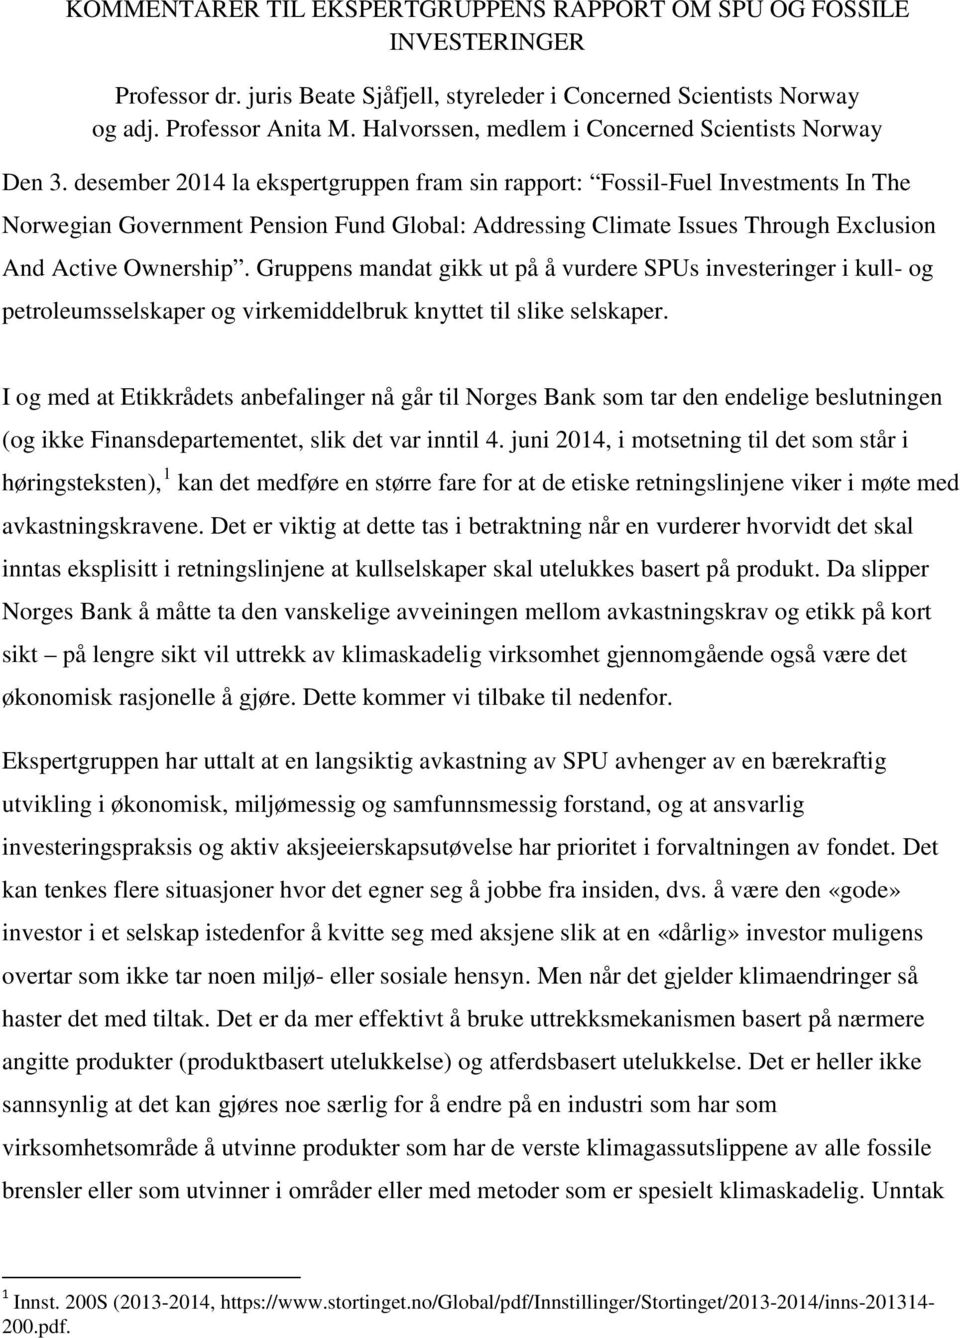 desember 2014 la ekspertgruppen fram sin rapport: Fossil-Fuel Investments In The Norwegian Government Pension Fund Global: Addressing Climate Issues Through Exclusion And Active Ownership.